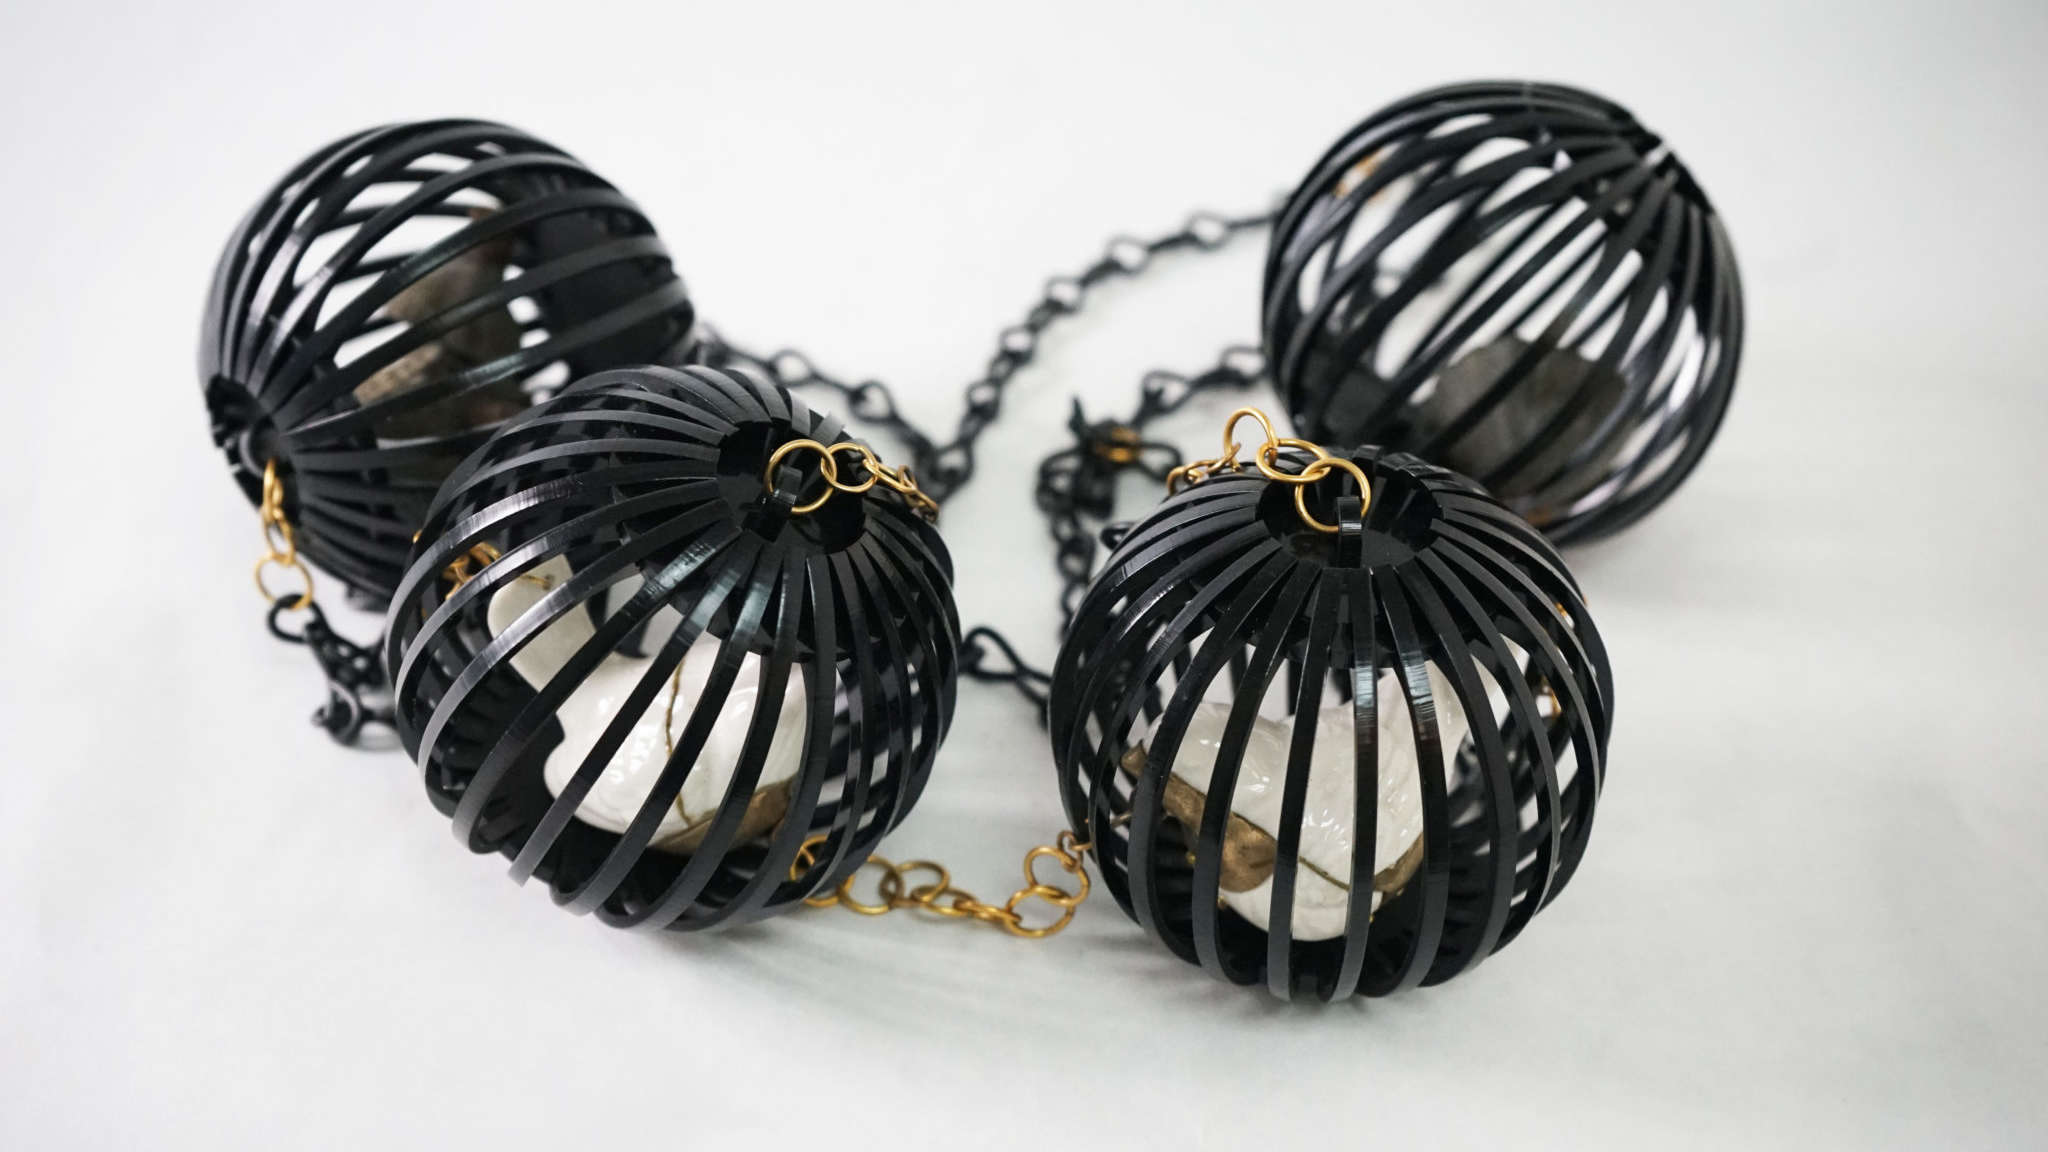 Necklace by Academy student Yiyang Wang